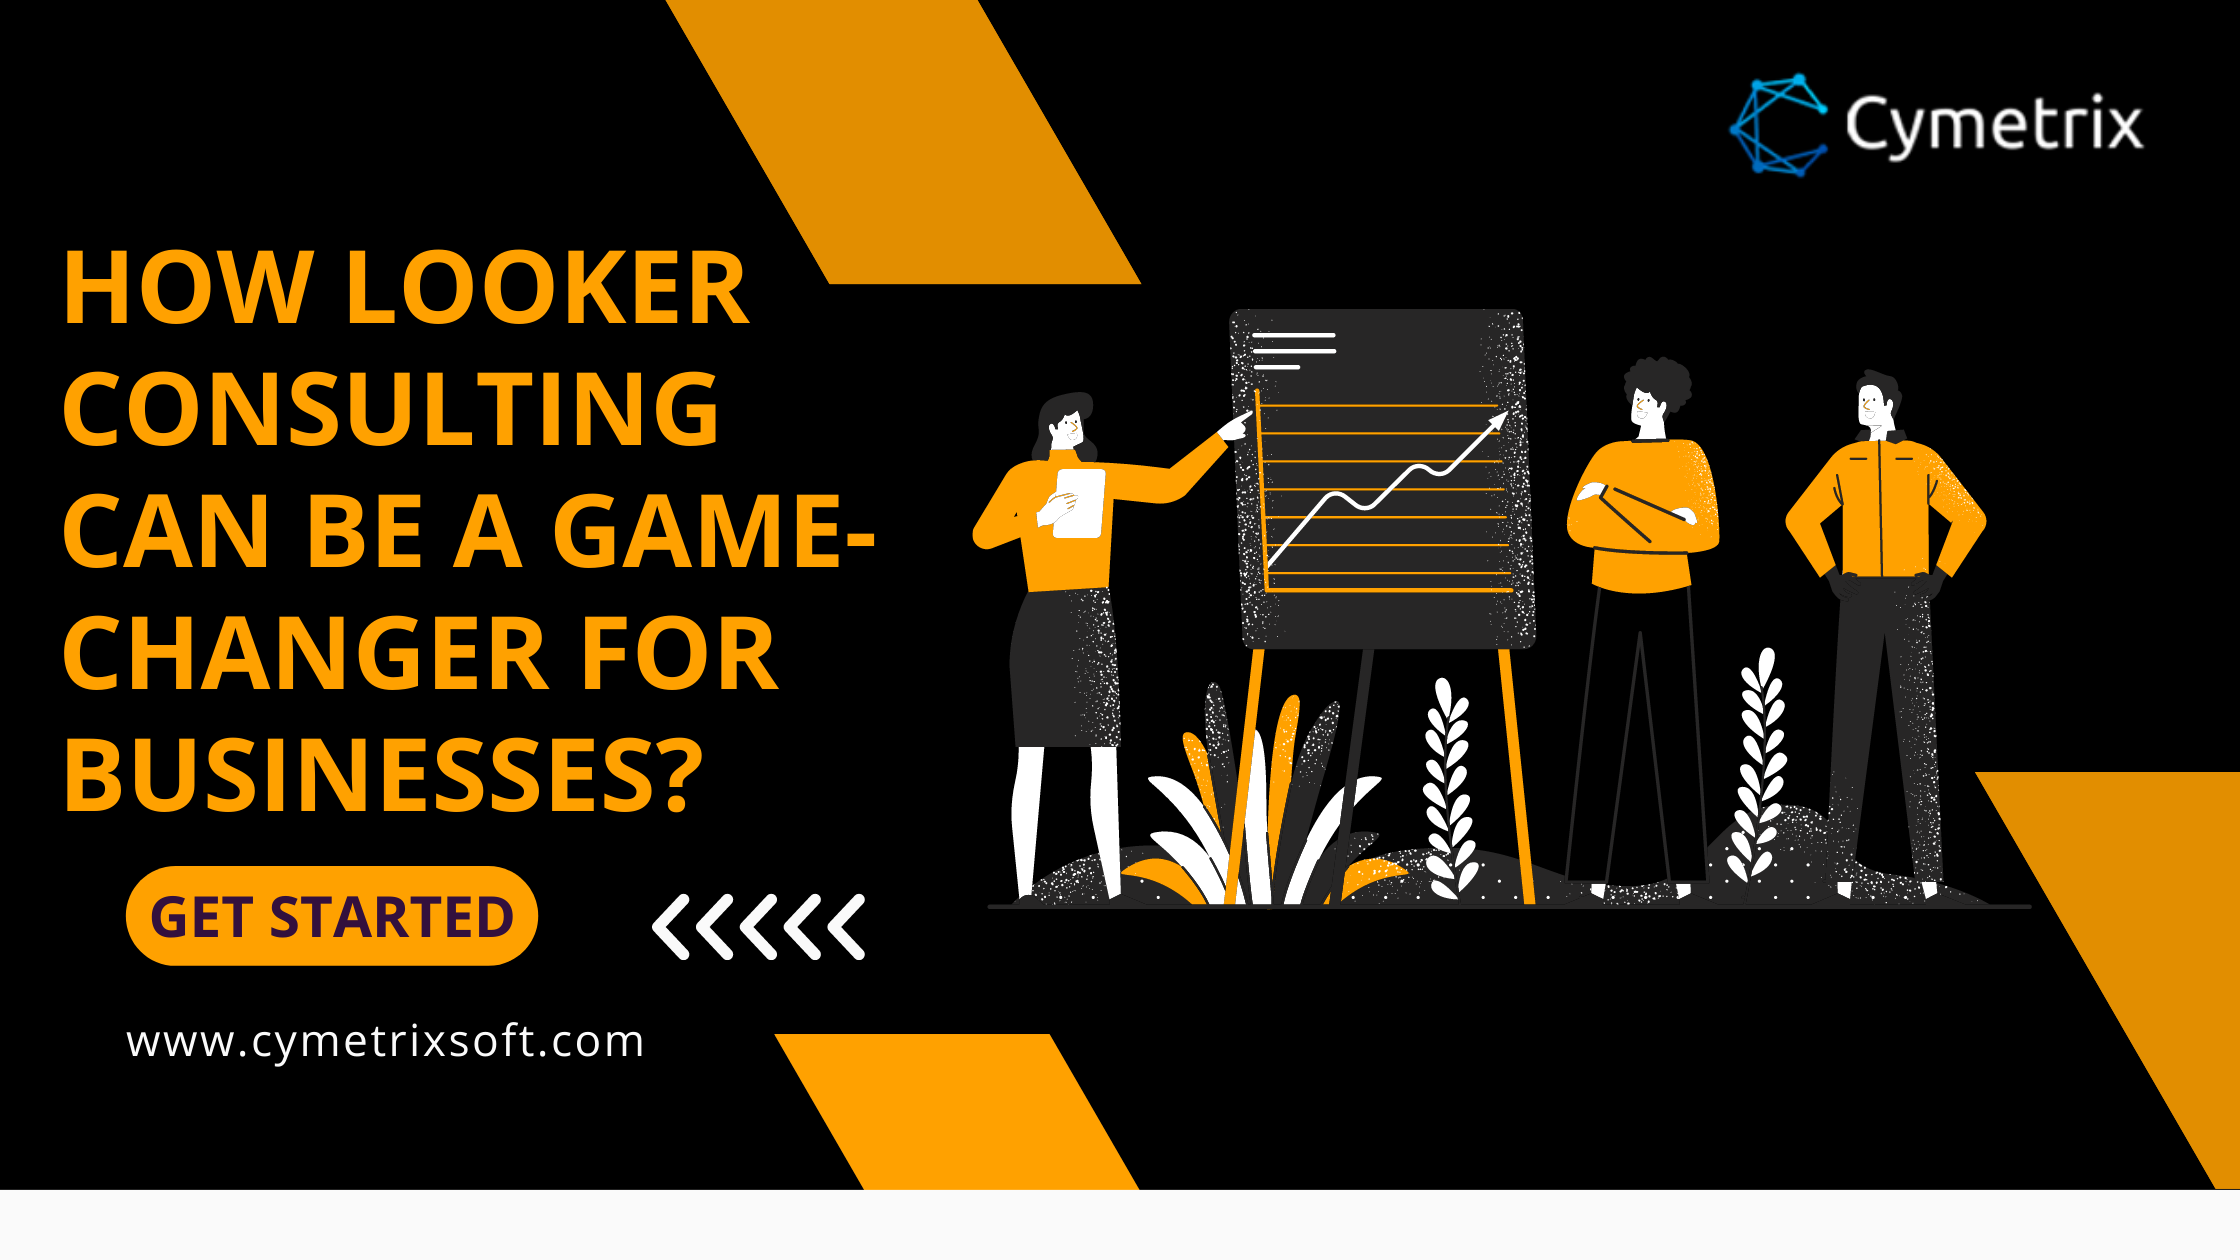 How Looker Consulting can be a game-changer for businesses?